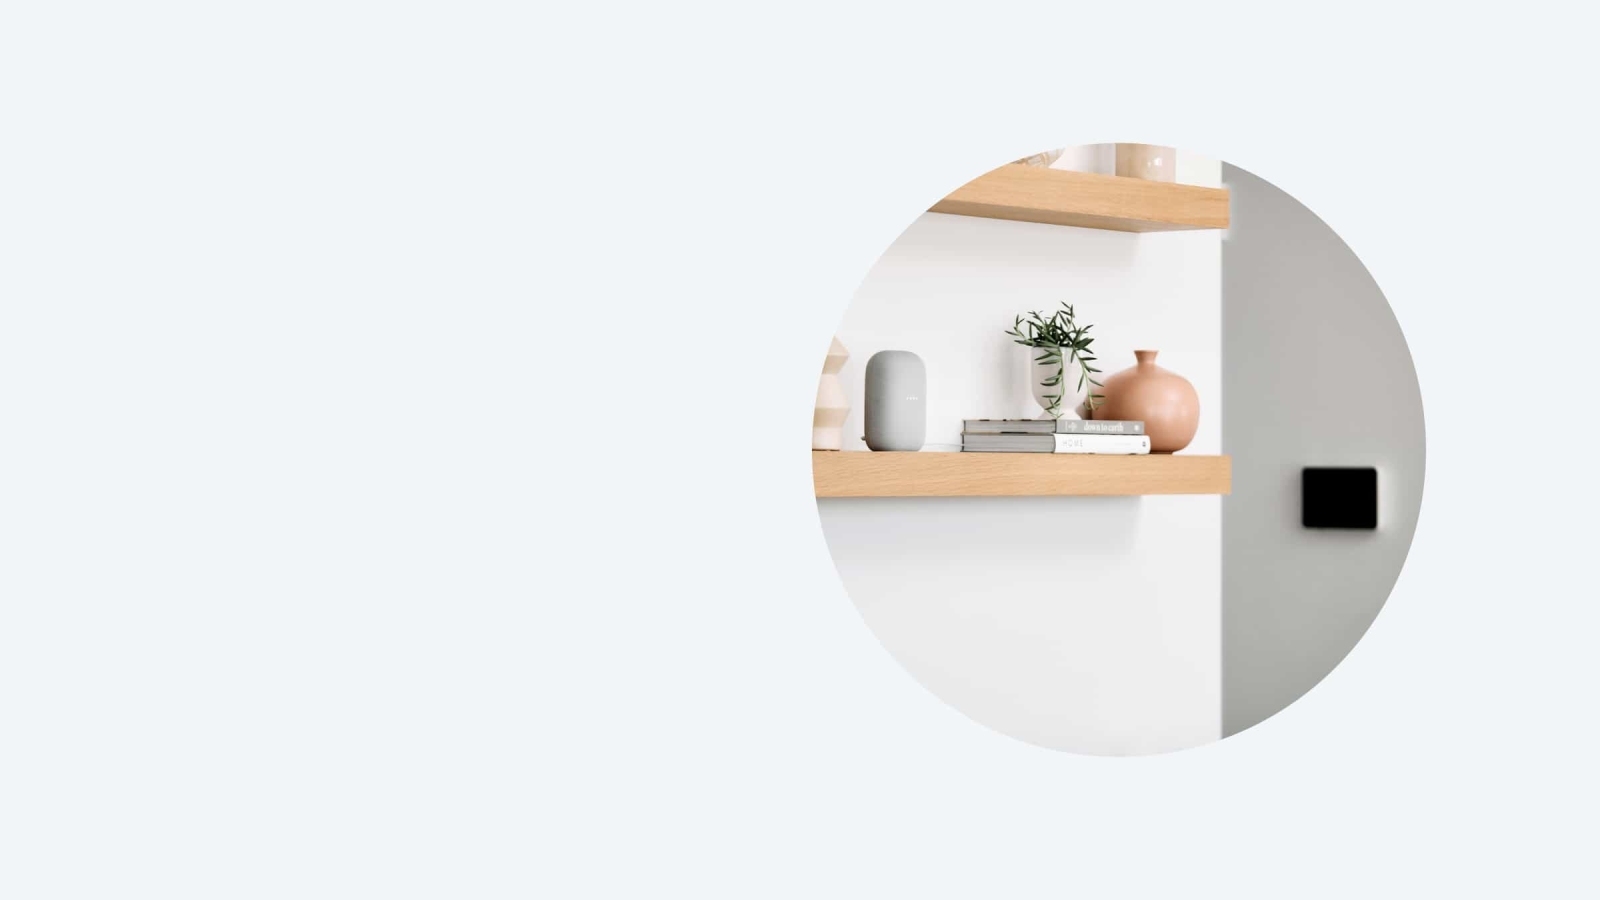 Google Home on Shelf with Books and Plant